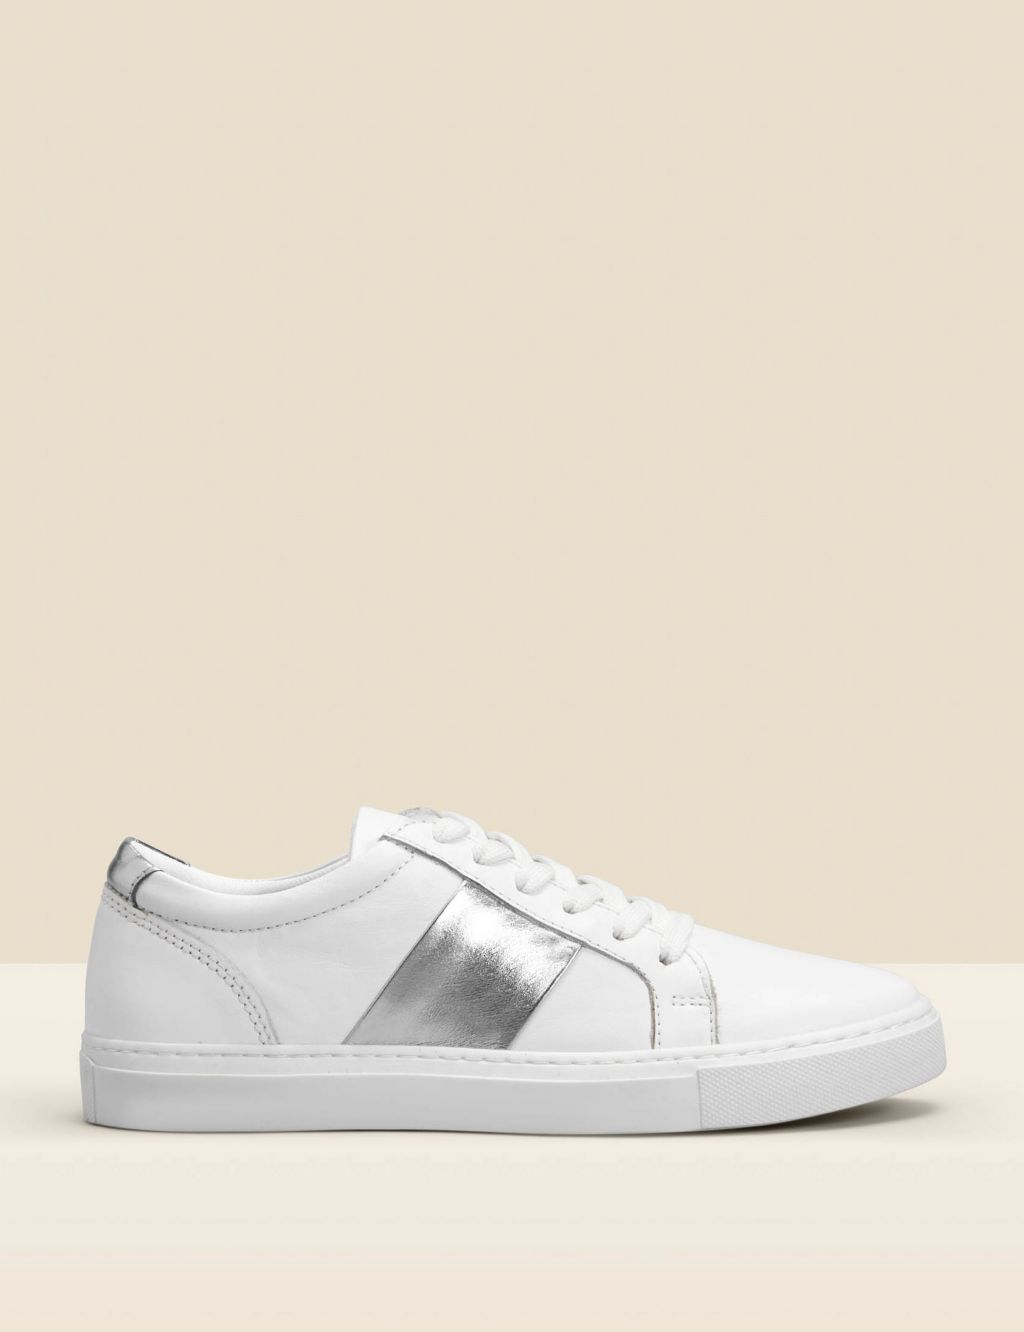 Leather Lace Up Metallic Stripe Trainers image 1